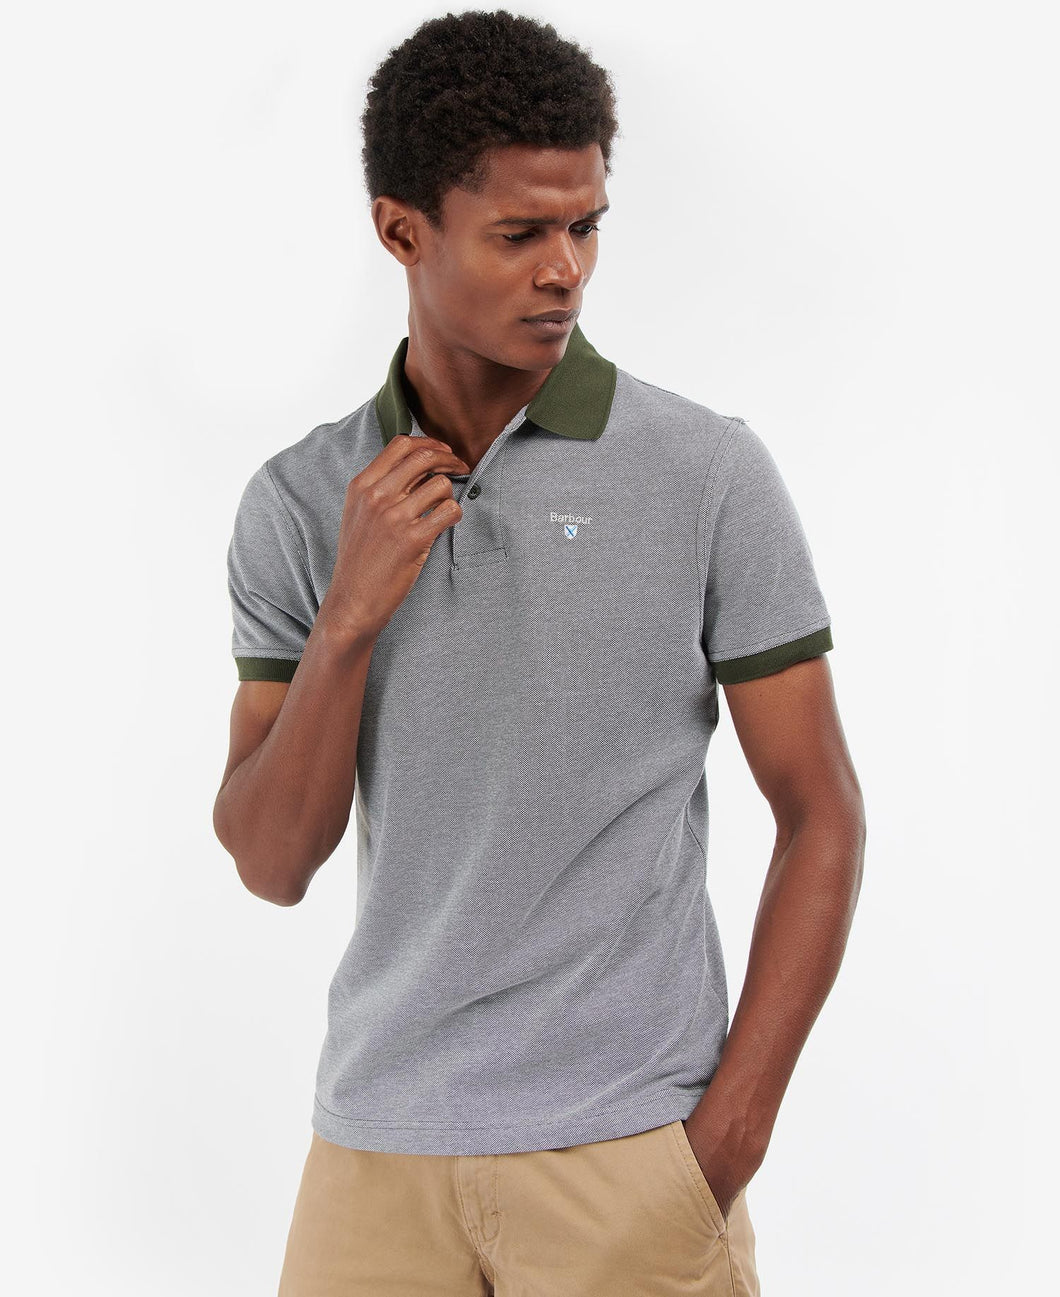 BARBOUR Sports Polo Mix Shirt - Men's - Dark Olive